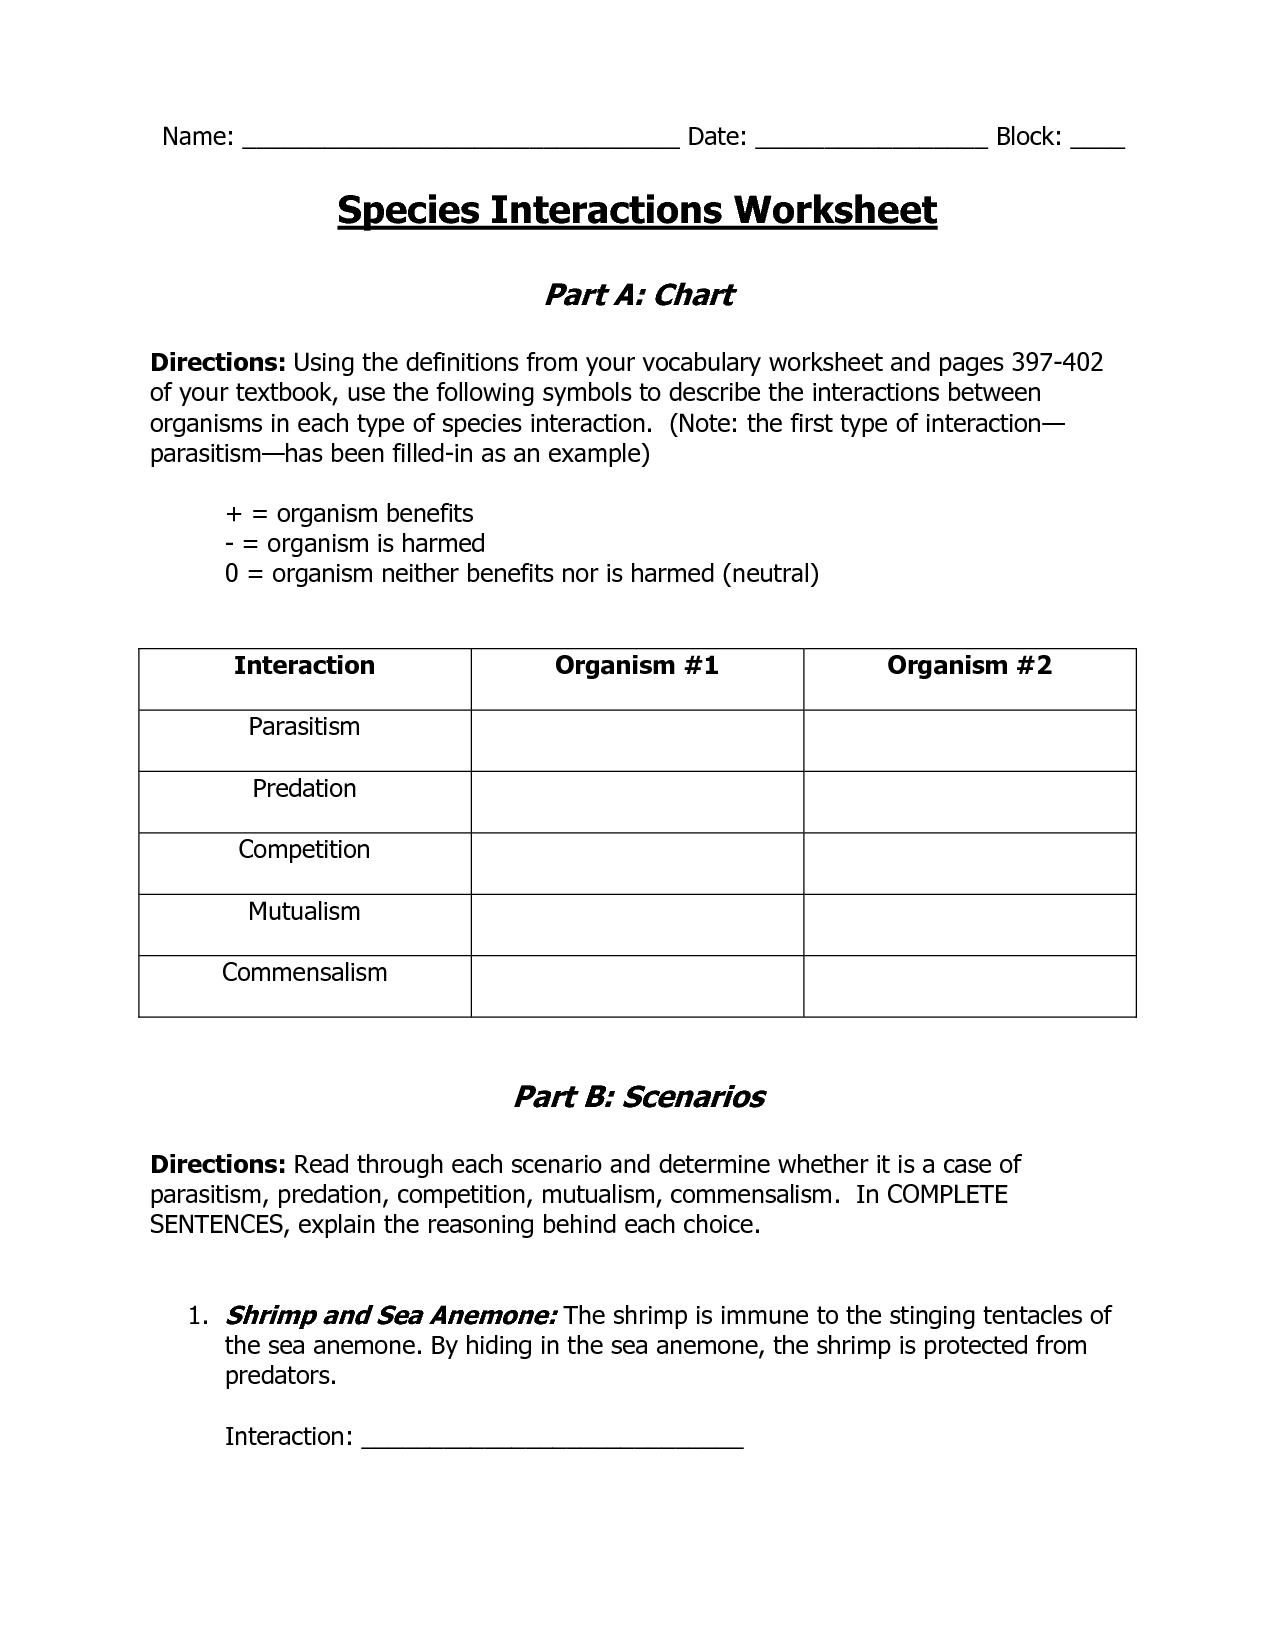 12-best-images-of-communities-and-ecosystems-worksheets-ecosystem-worksheet-answer-key